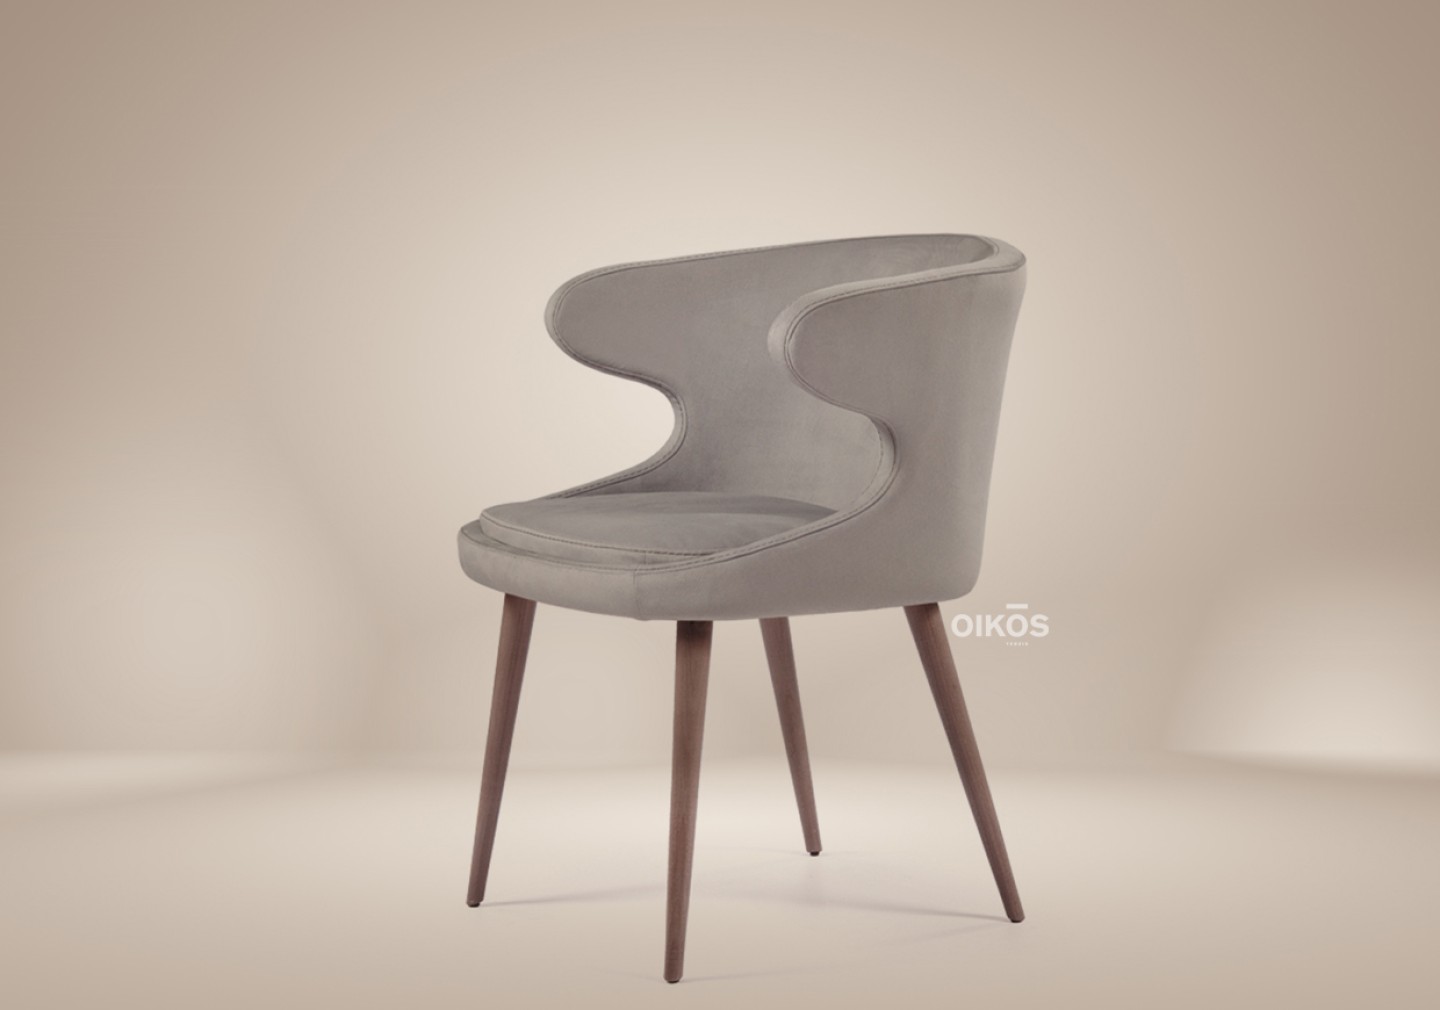 THE PALOMA DINING CHAIR